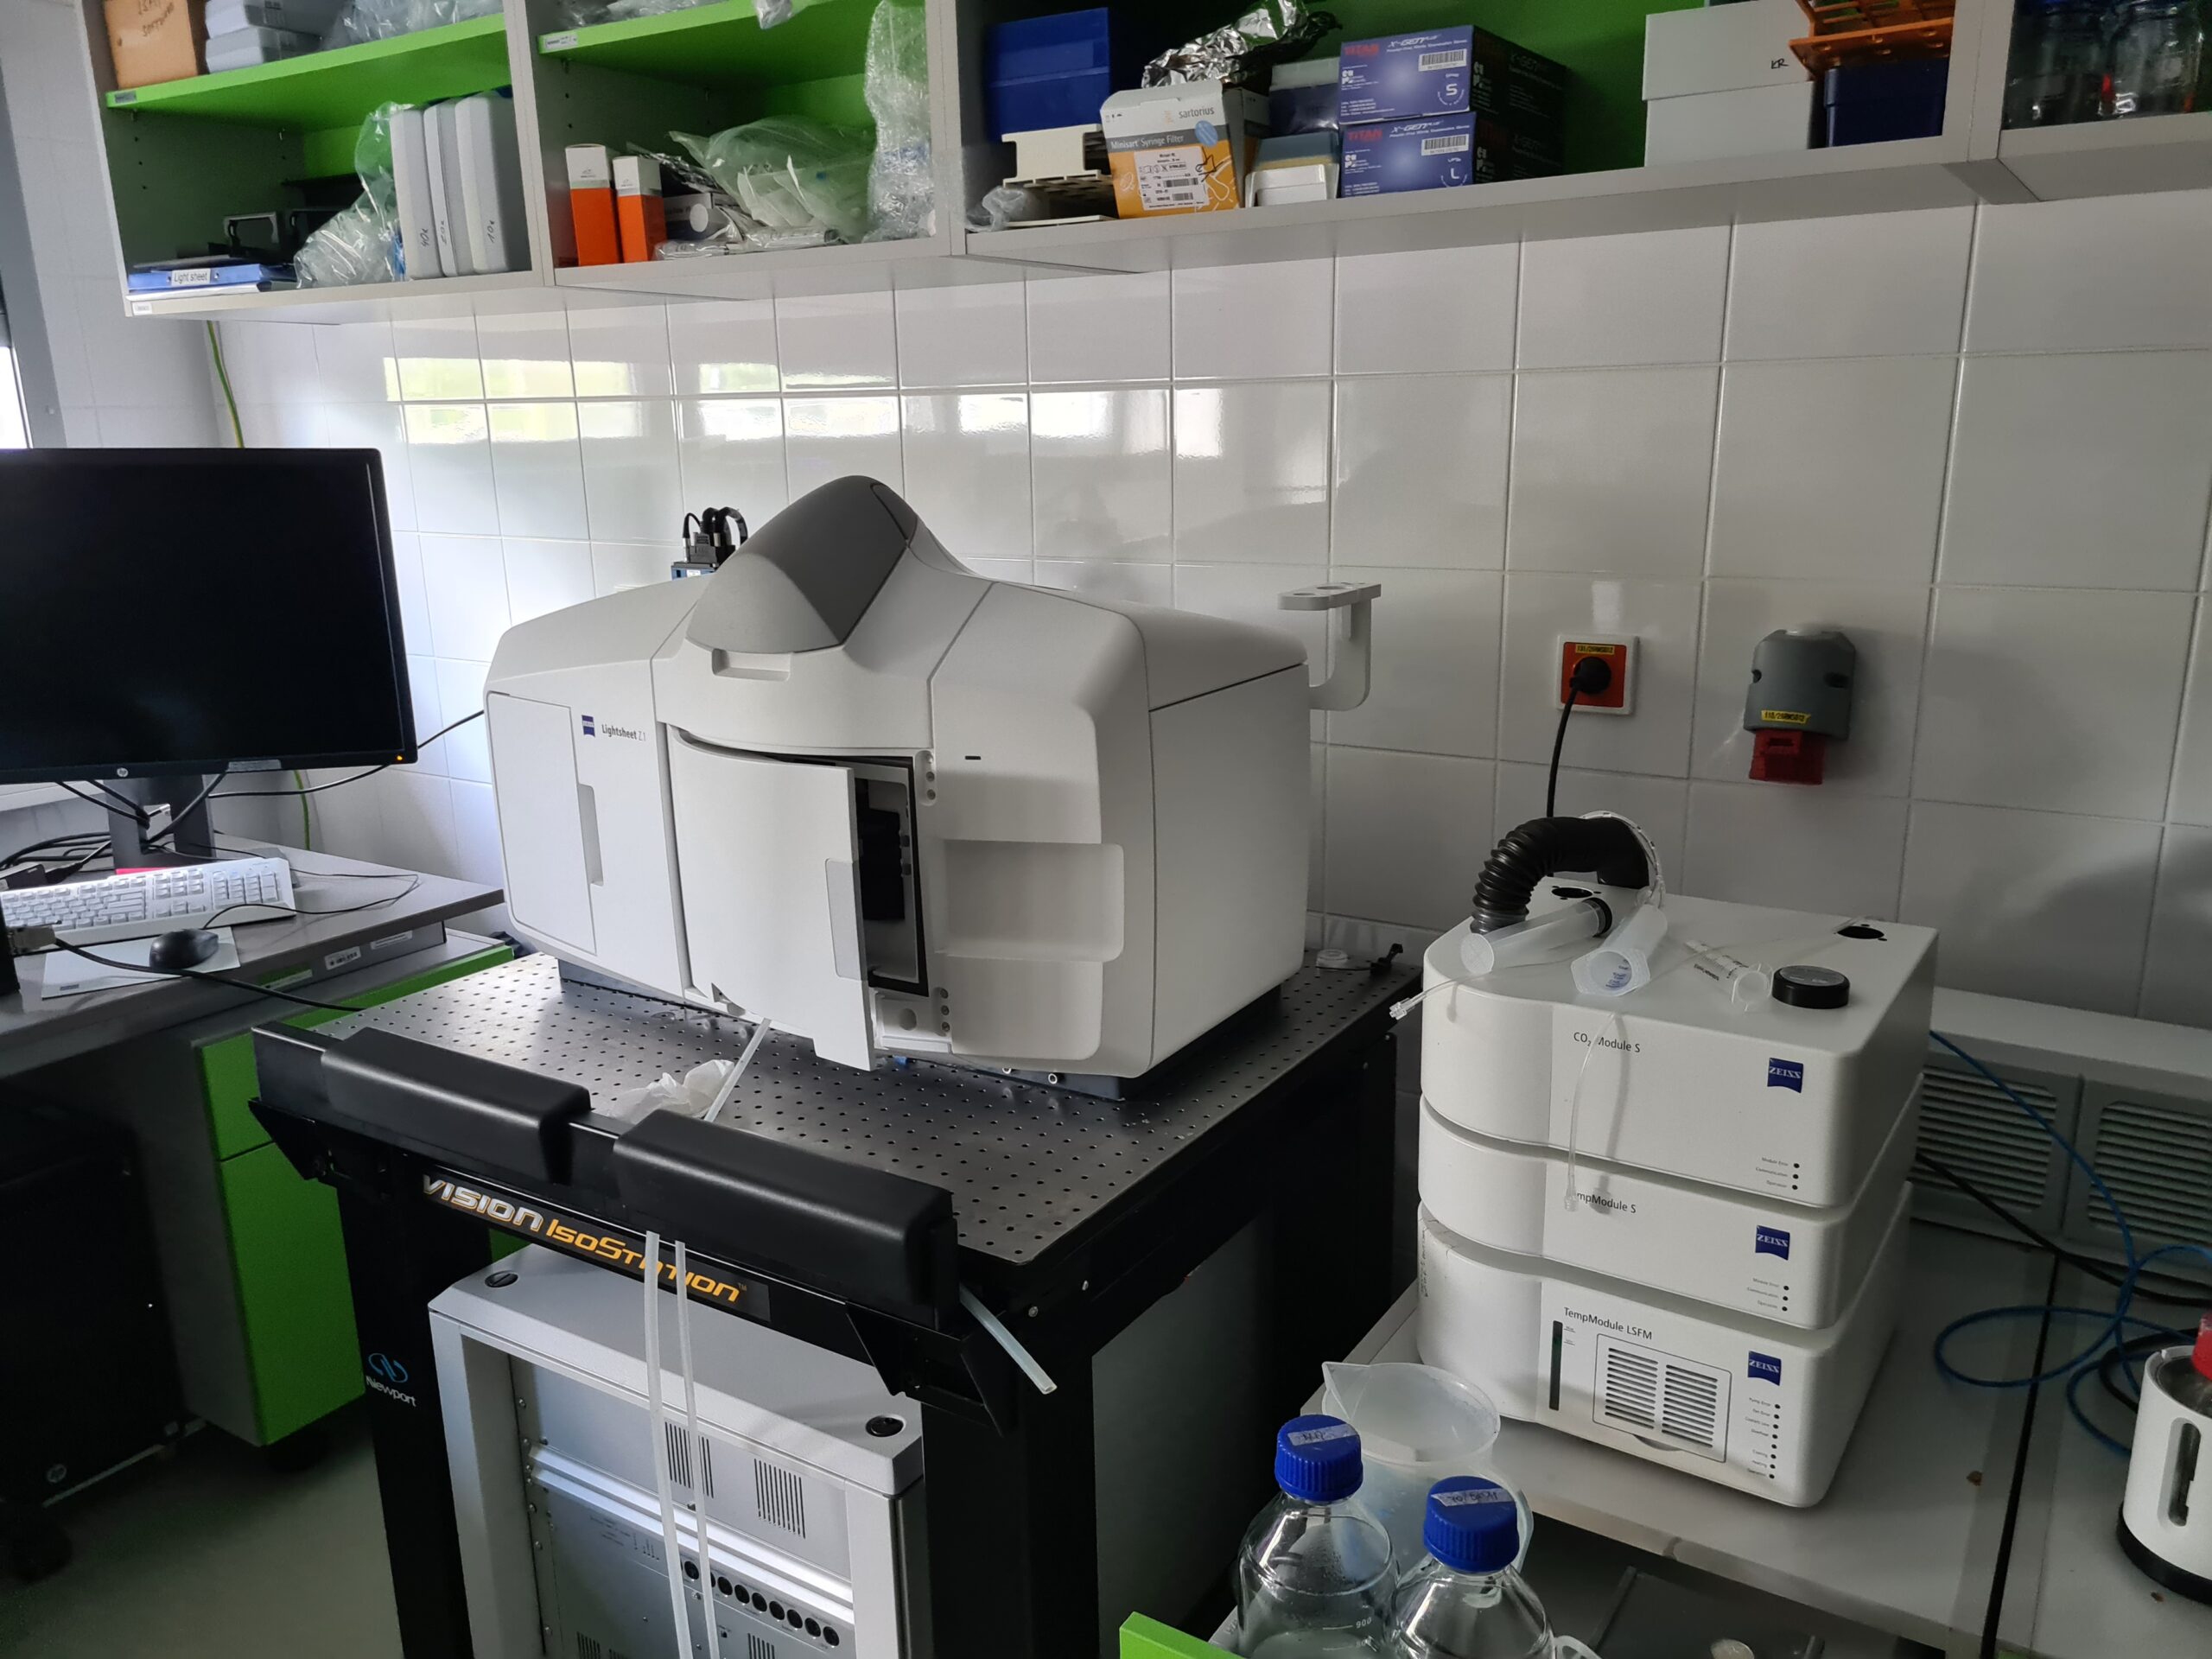 Lightsheet microscope dedicated for imaging of plant samples at the Brno CELLIM facility